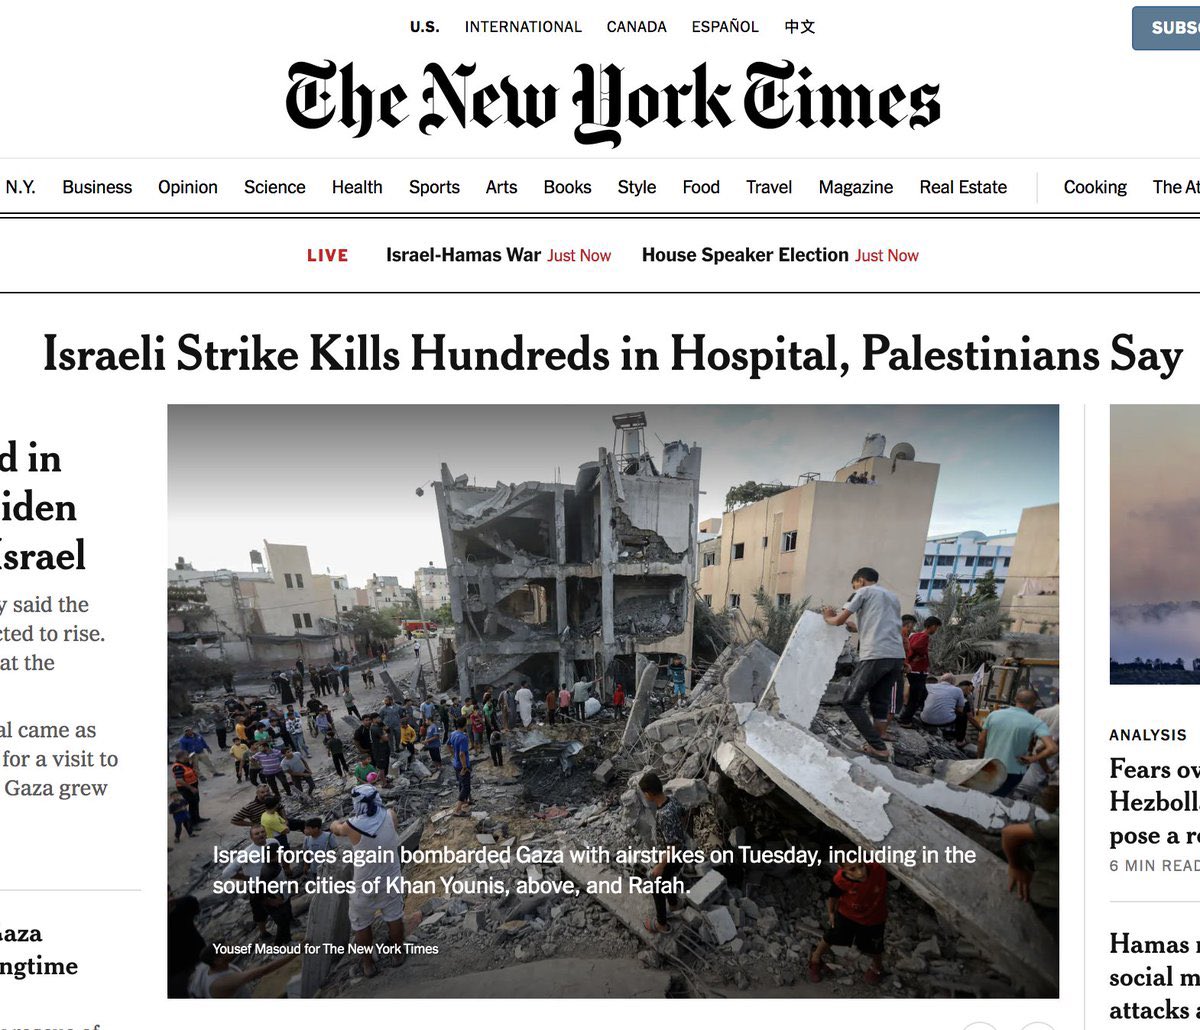 Yesterday, when @NYTimes published a fictitious story from Hamas about Israel bombing a hospital, NYT used a picture from a completely different location to make it look like a picture of the hospital that was “destroyed.” Astonishing disinformation and journalistic malpractice.